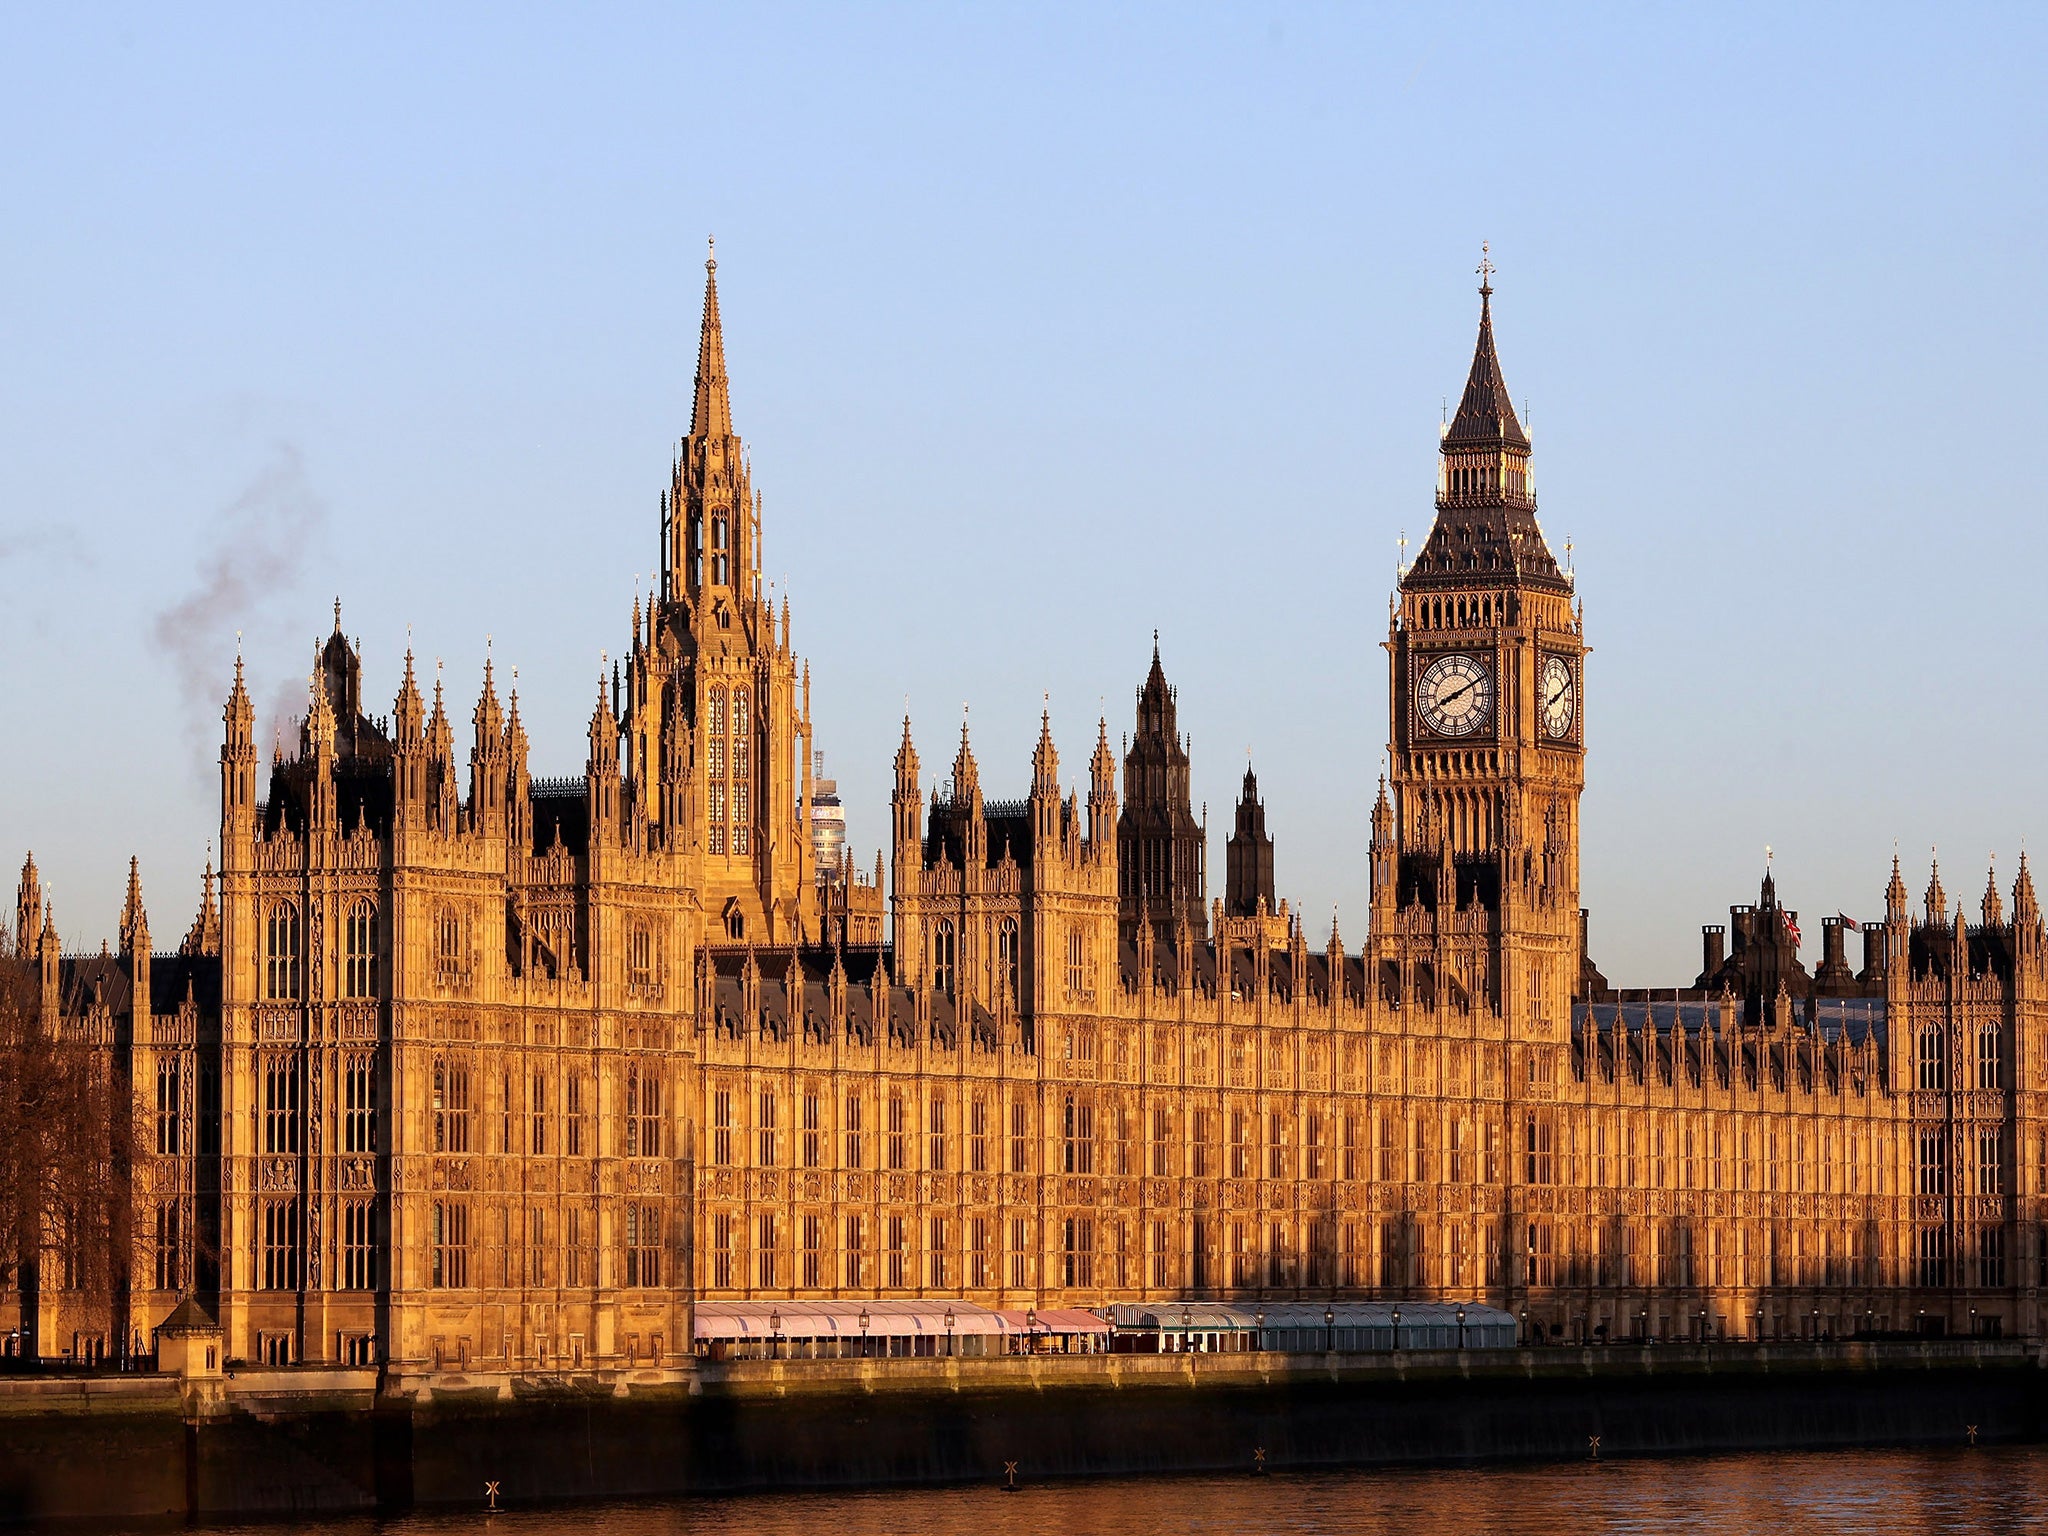 MPs' expenses were among details revealed by FOI